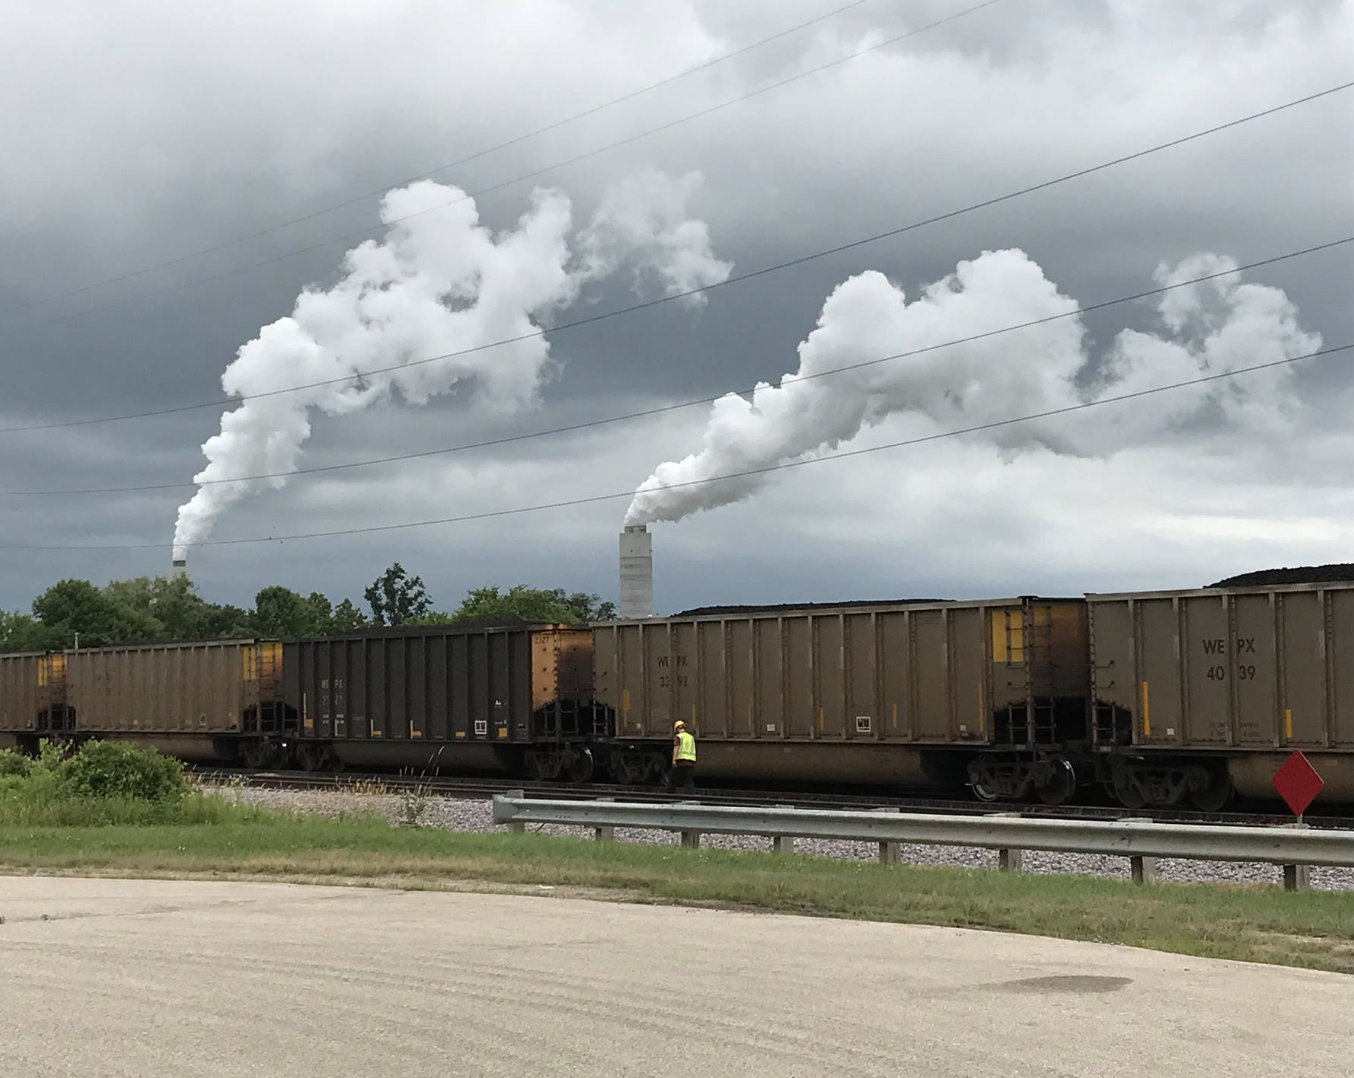 A train delivering coal passes in front of plumes of smoke coming from the Oak Creek plant